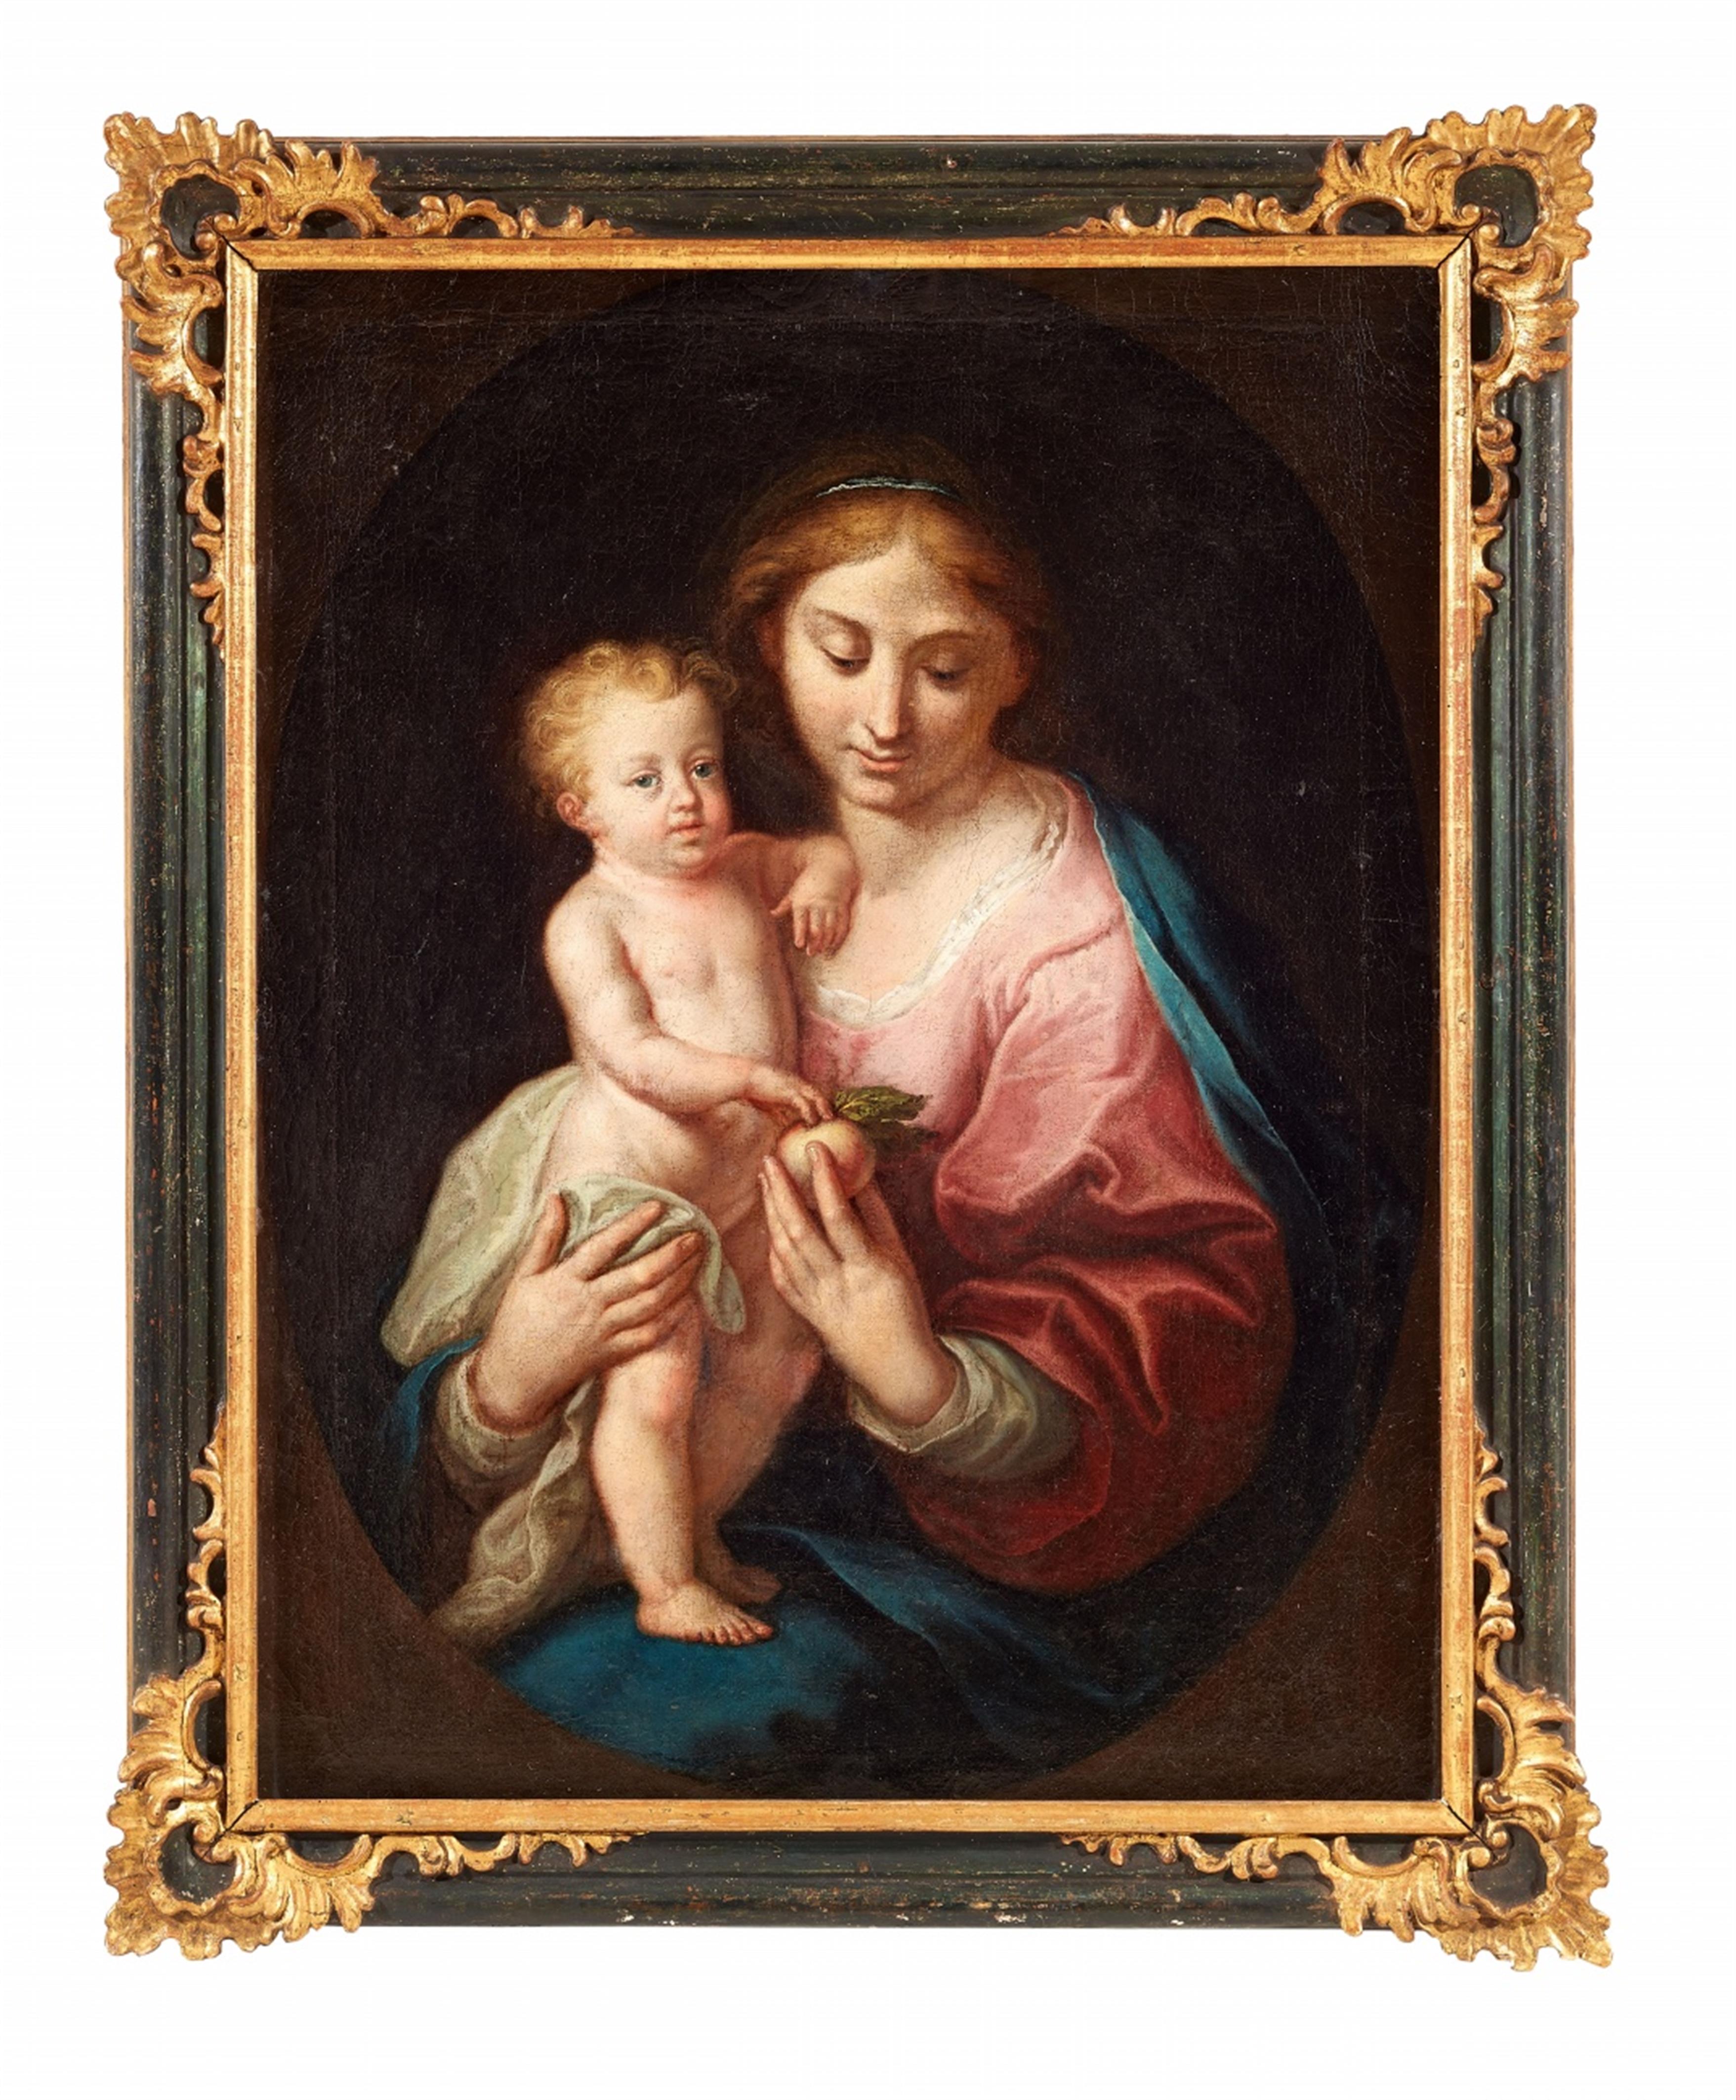 South German or Austrian School, 18th century - The Virgin and Child in a painted Oval - image-1